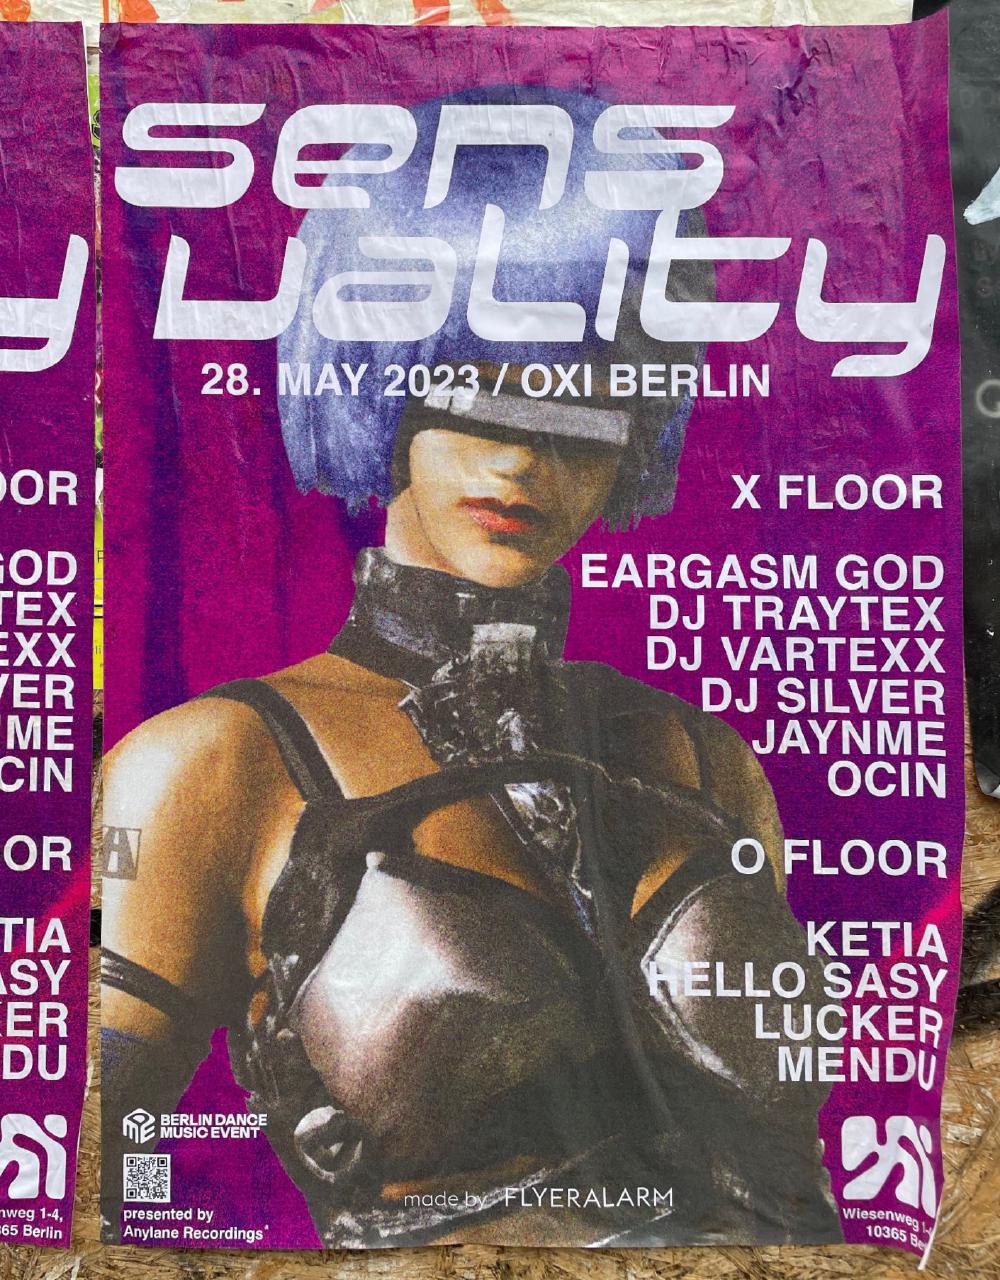 Poster for Sensuality at Oxi Berlin